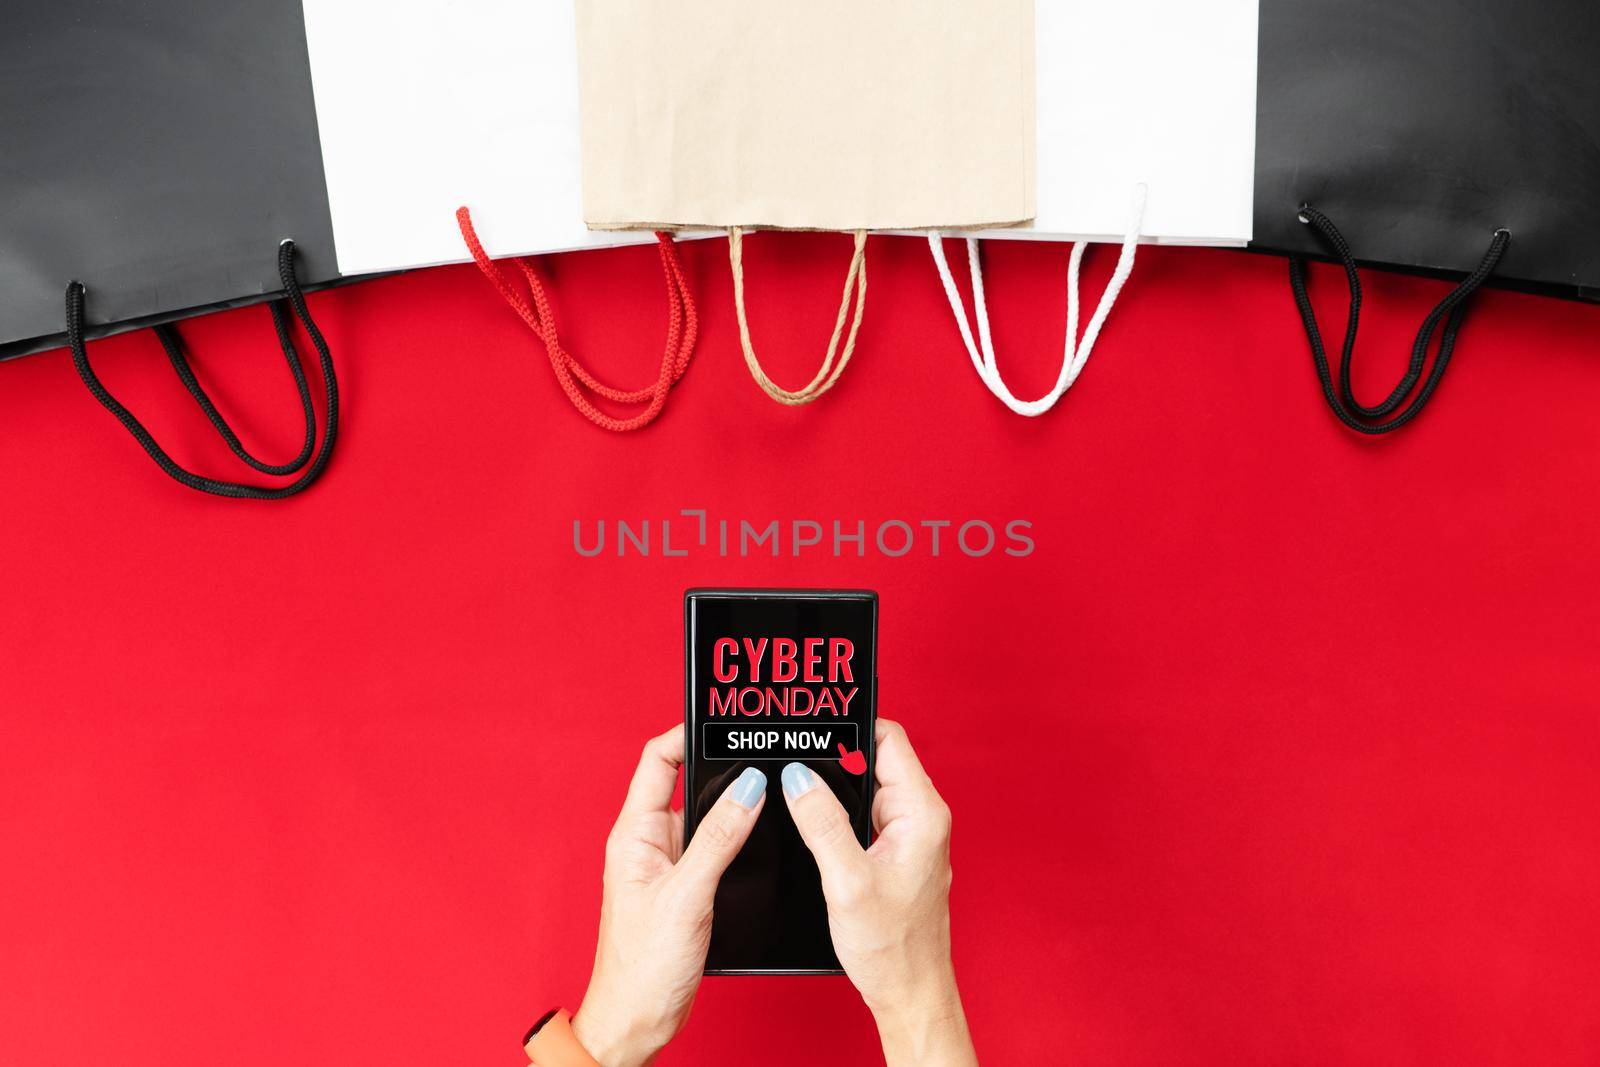 Cyber Monday Sale Clearance Discount Concept, woman hand holding smartphone with shopping bag.